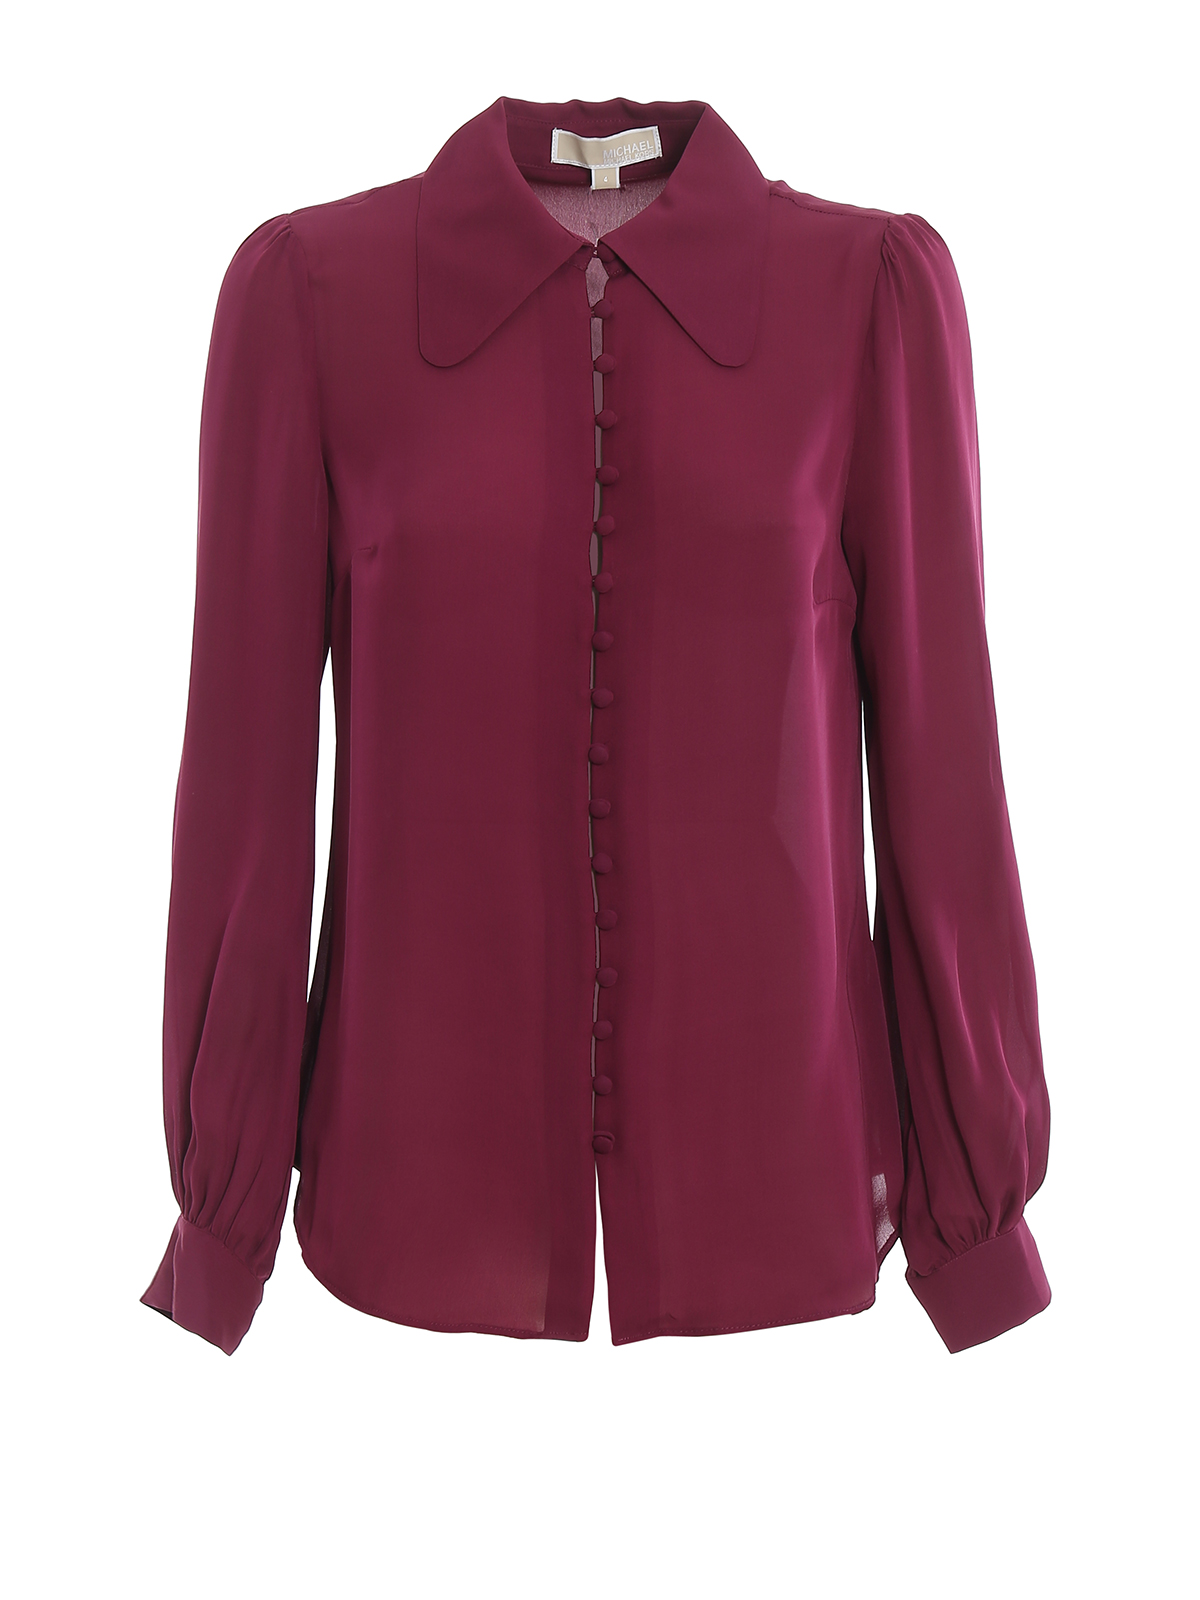 MICHAEL KORS SILK SHIRT WITH WRAPPED BUTTONS